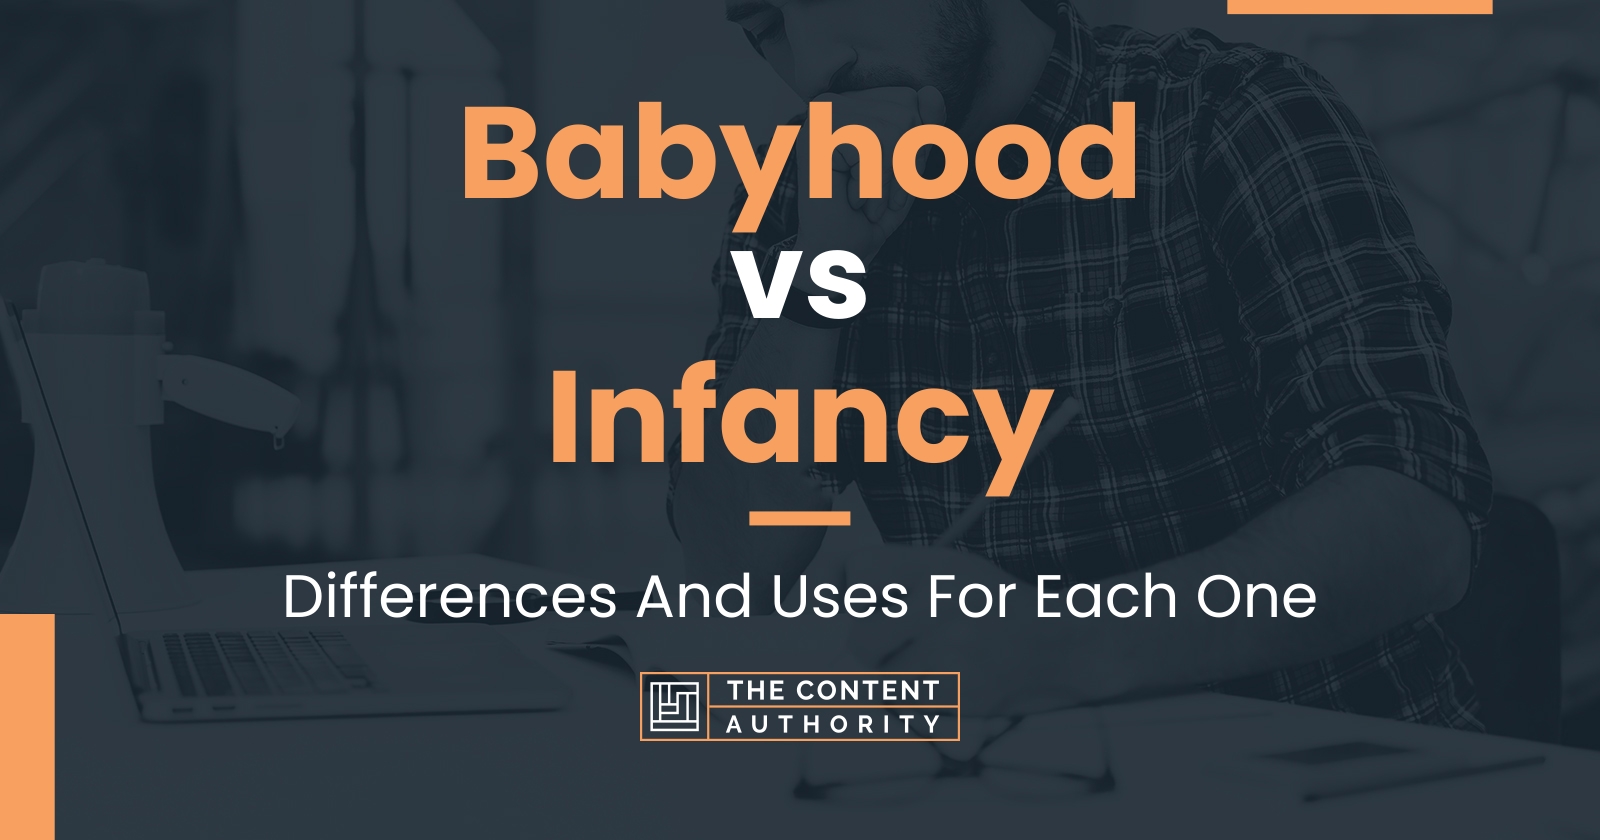 Babyhood vs Infancy: Differences And Uses For Each One